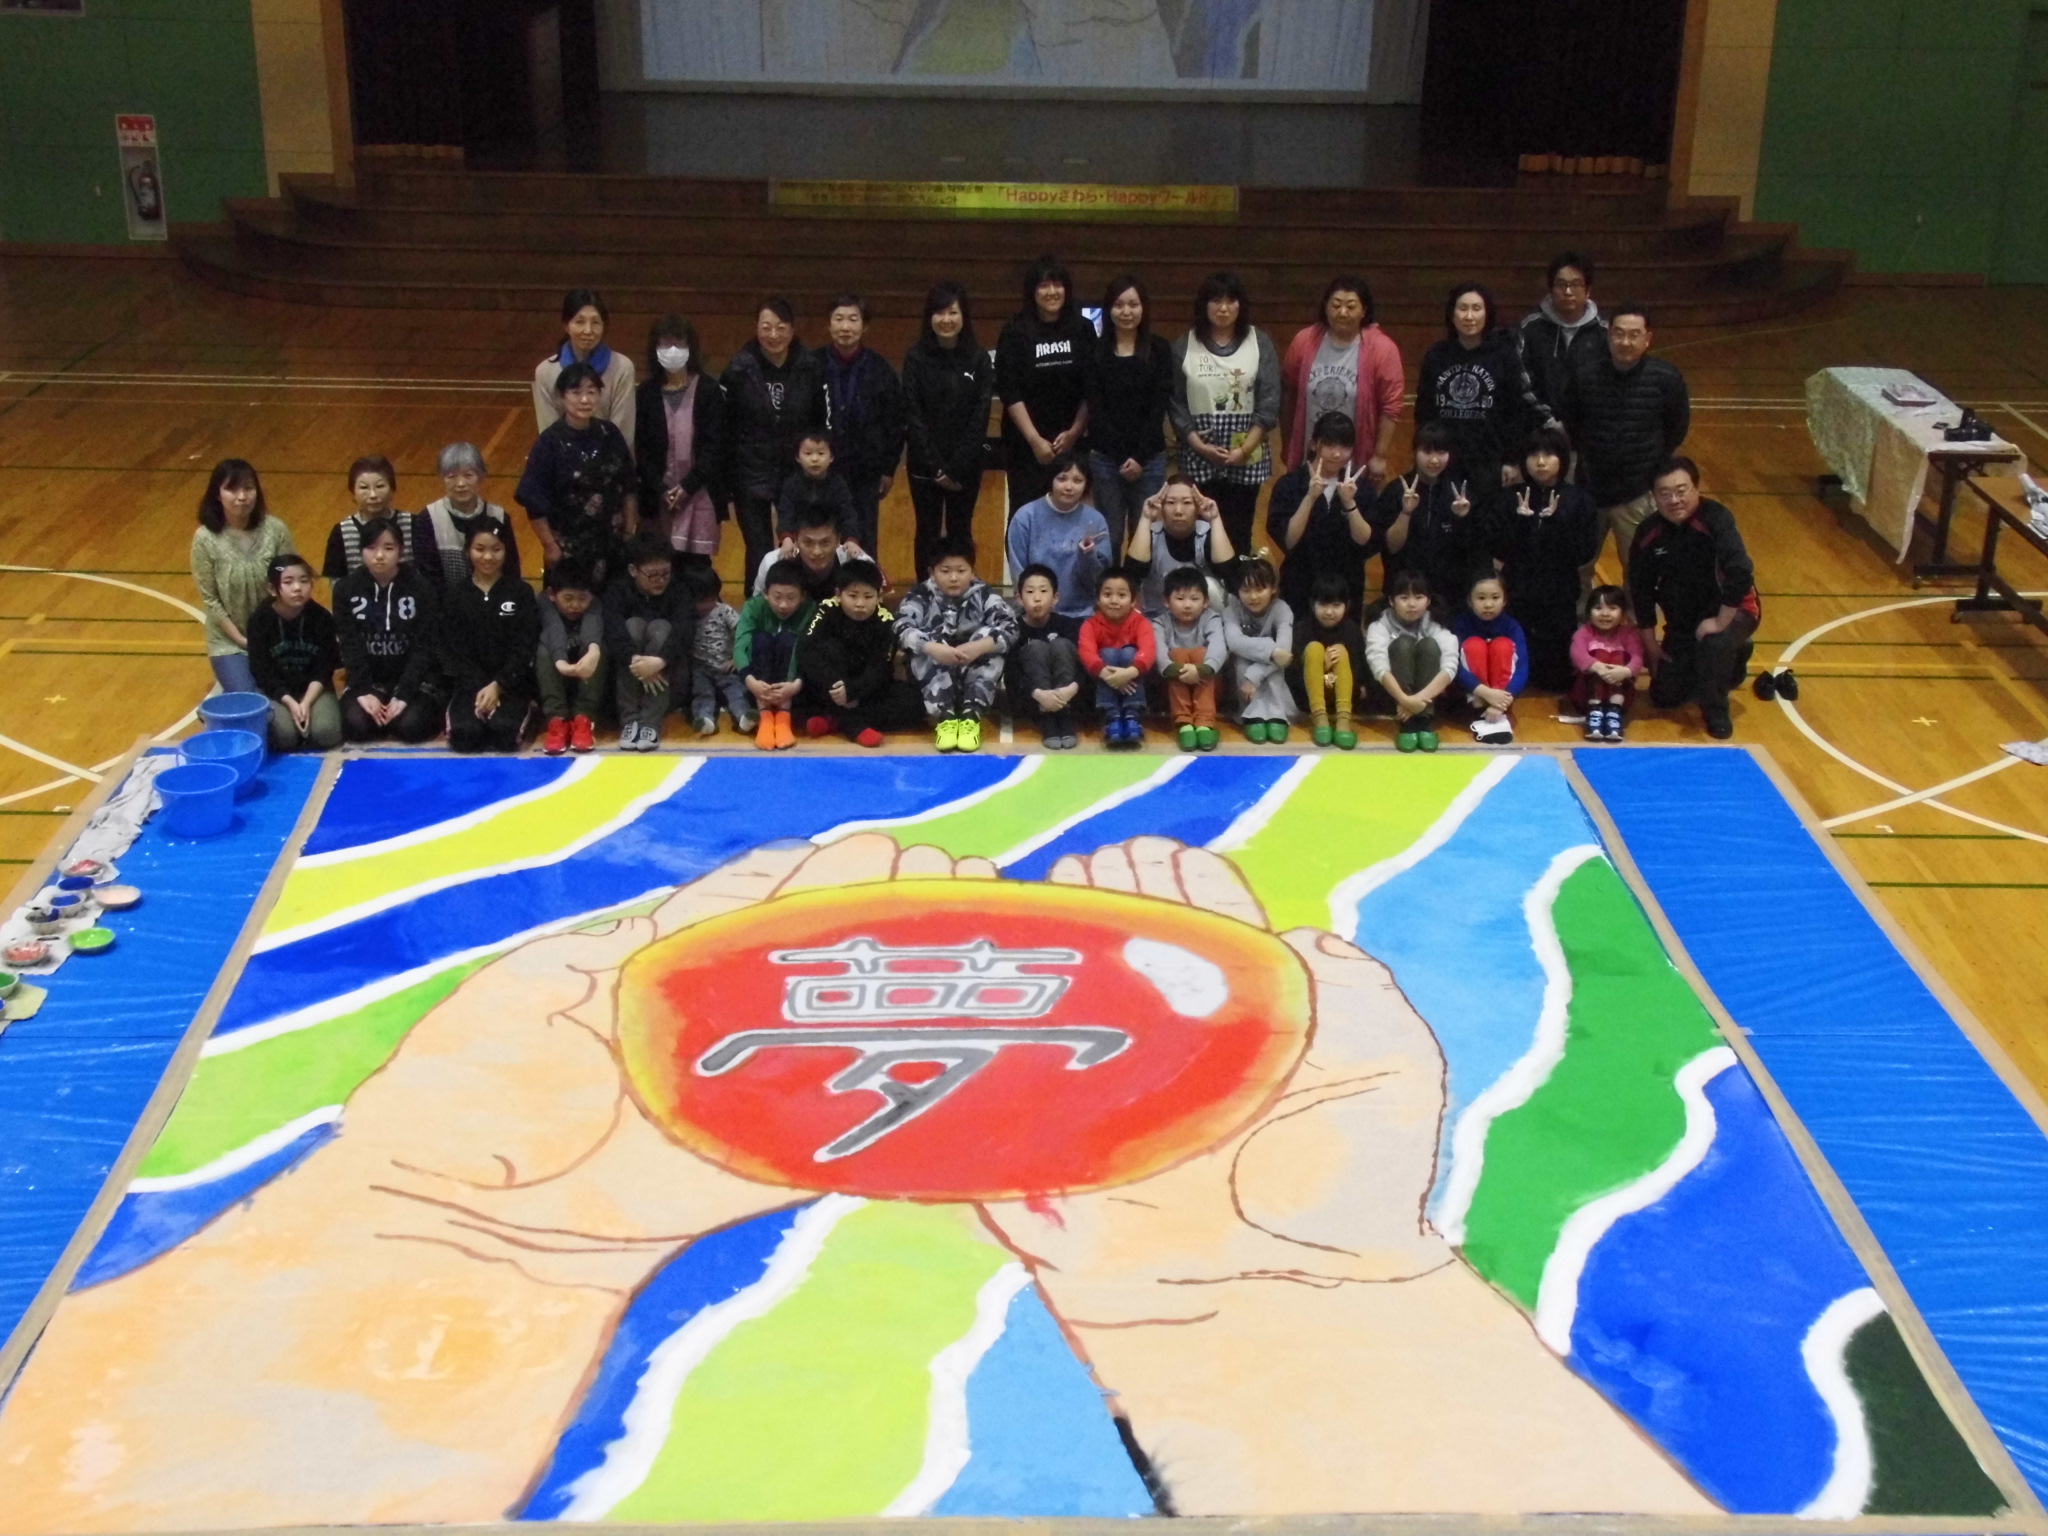 The Biggest Painting in the World 2020 Mori Town was completed